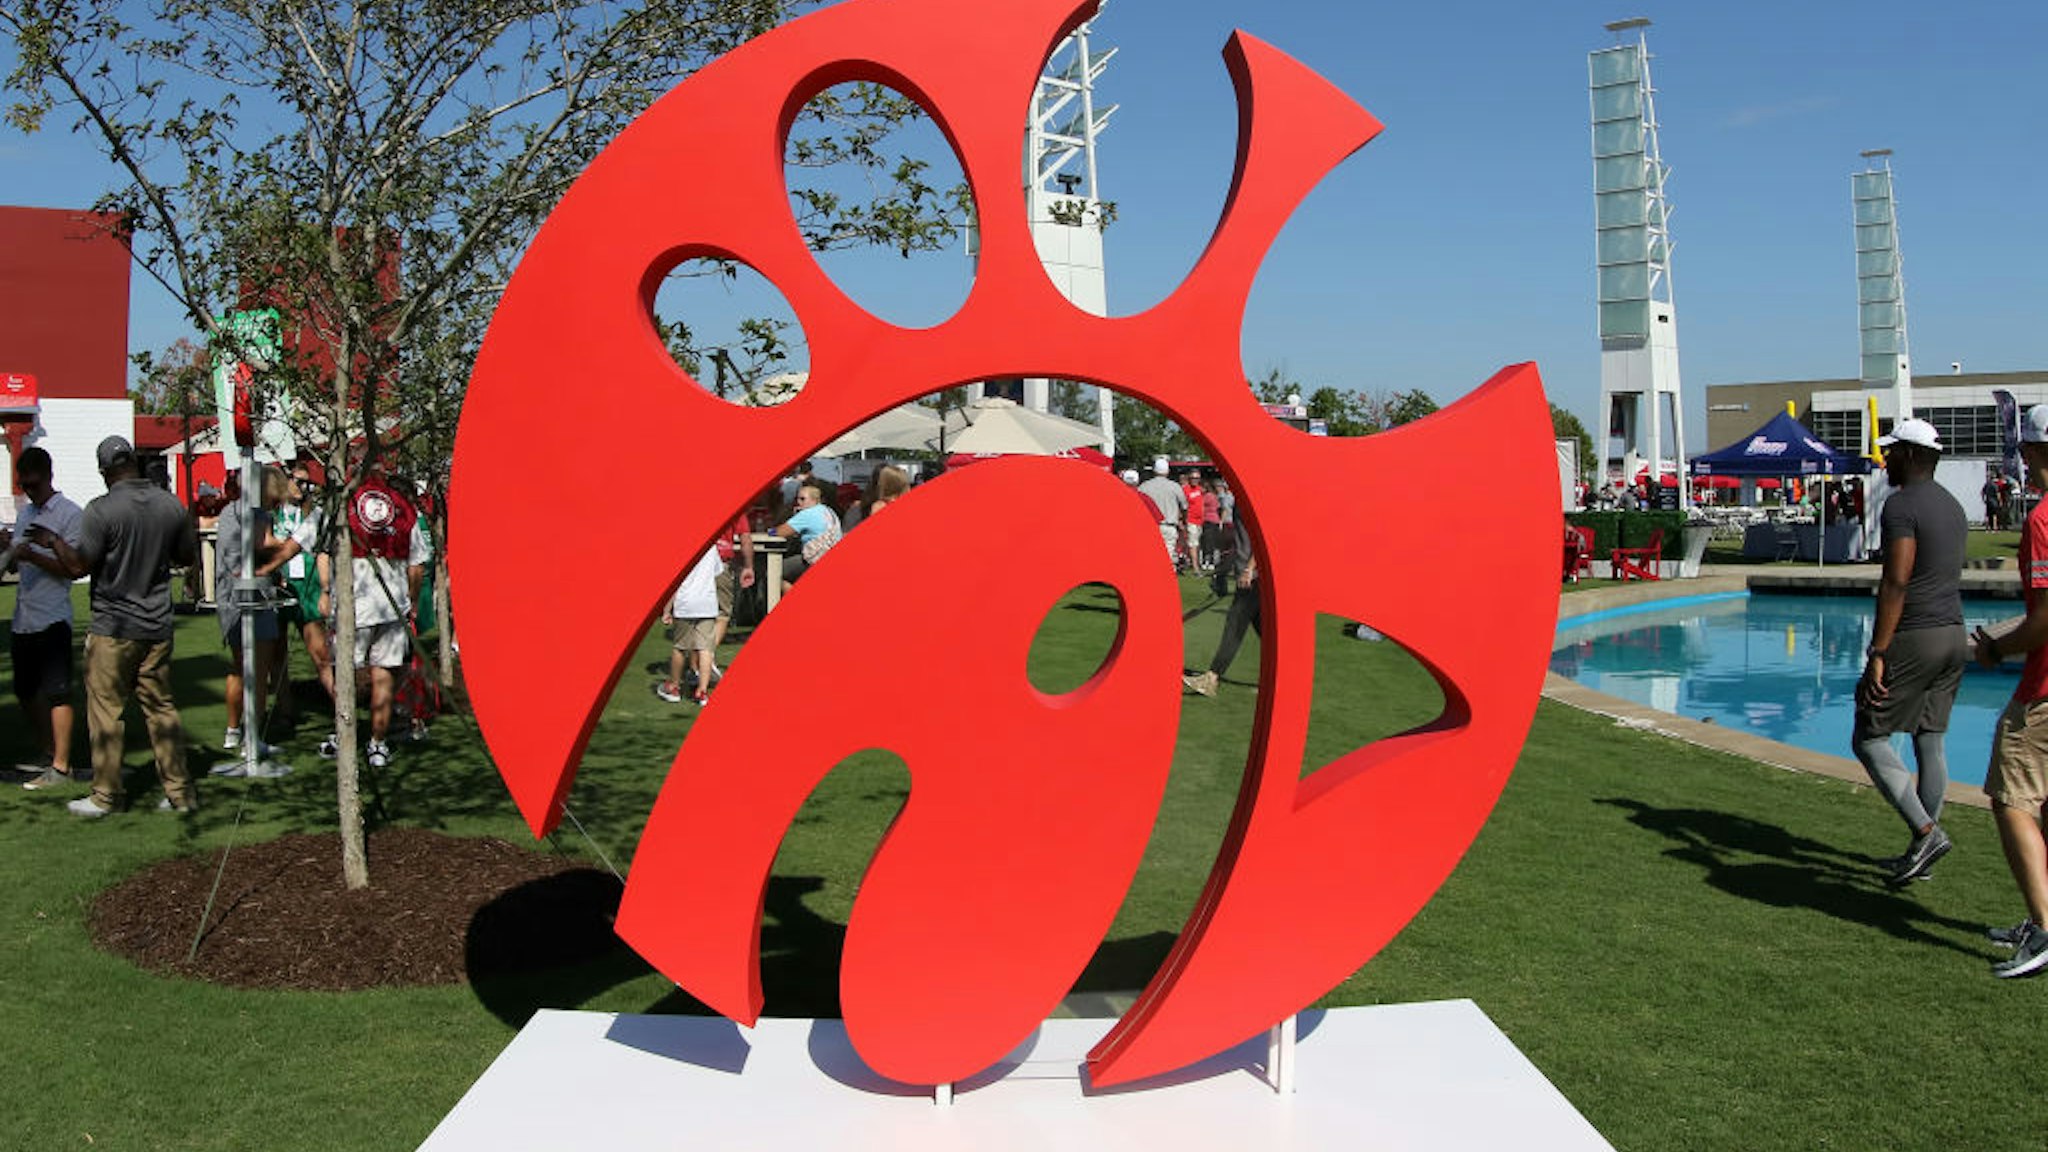 A view of the Chick-fil-A logo outside the stadium before the Chick-fil-A Kickoff Game between the Alabama Crimson Tide and the Duke Blue Devils on August 31, 2019 at Mercedes-Benz Stadium in Atlanta, Georgia. (Photo by Michael Wade/Icon Sportswire via Getty Images)